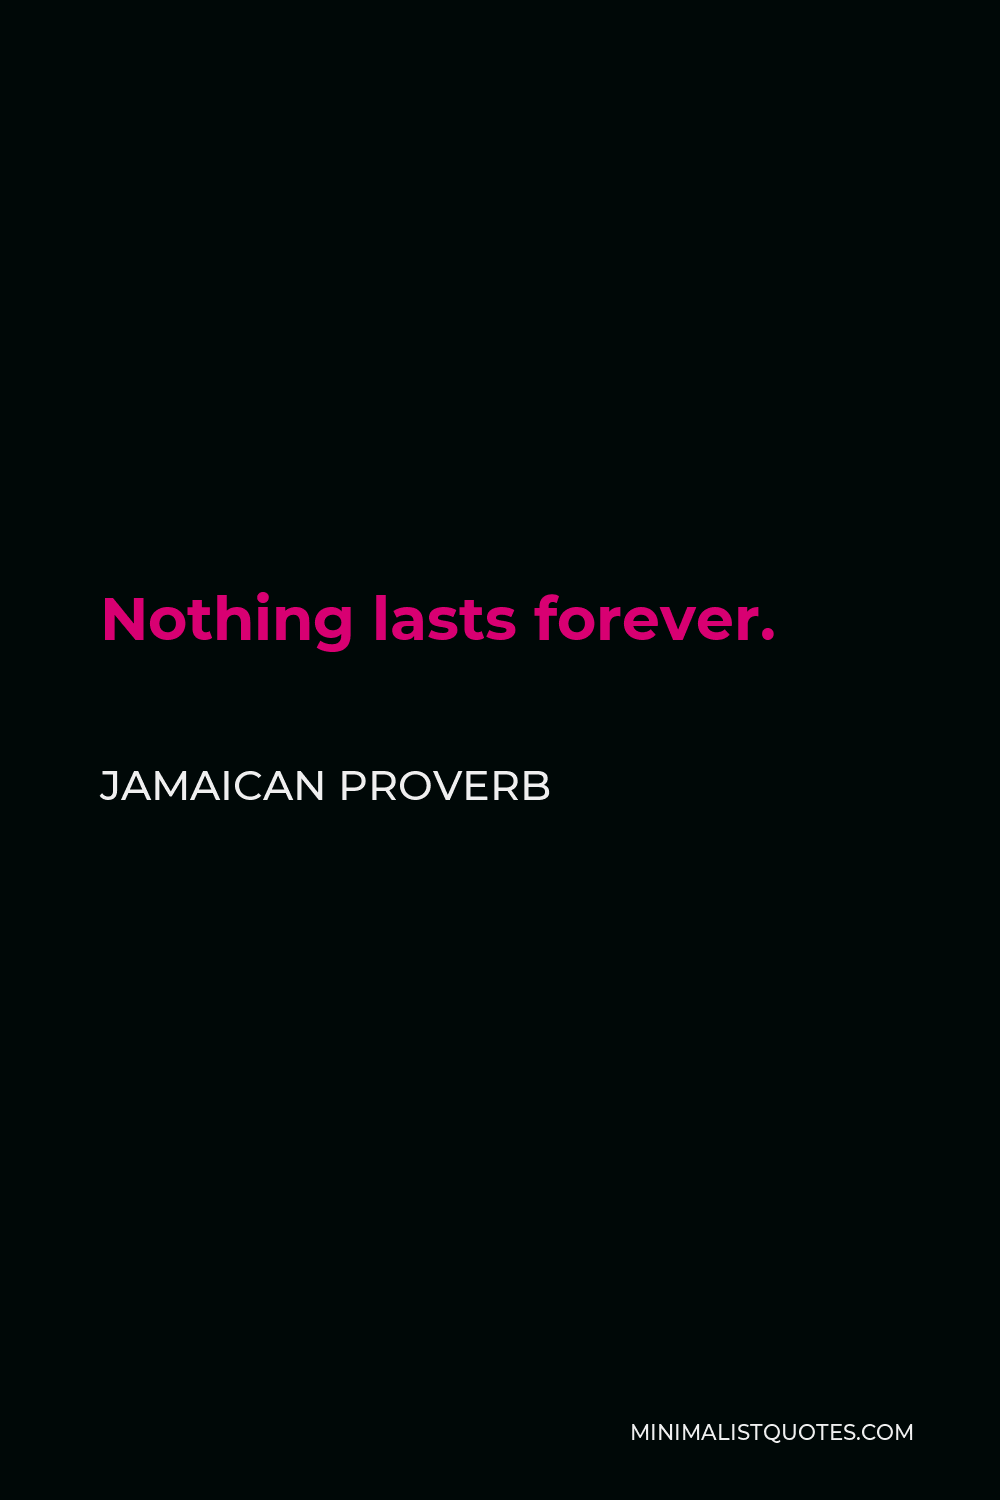 Jamaican Proverb Quote - Nothing lasts forever.